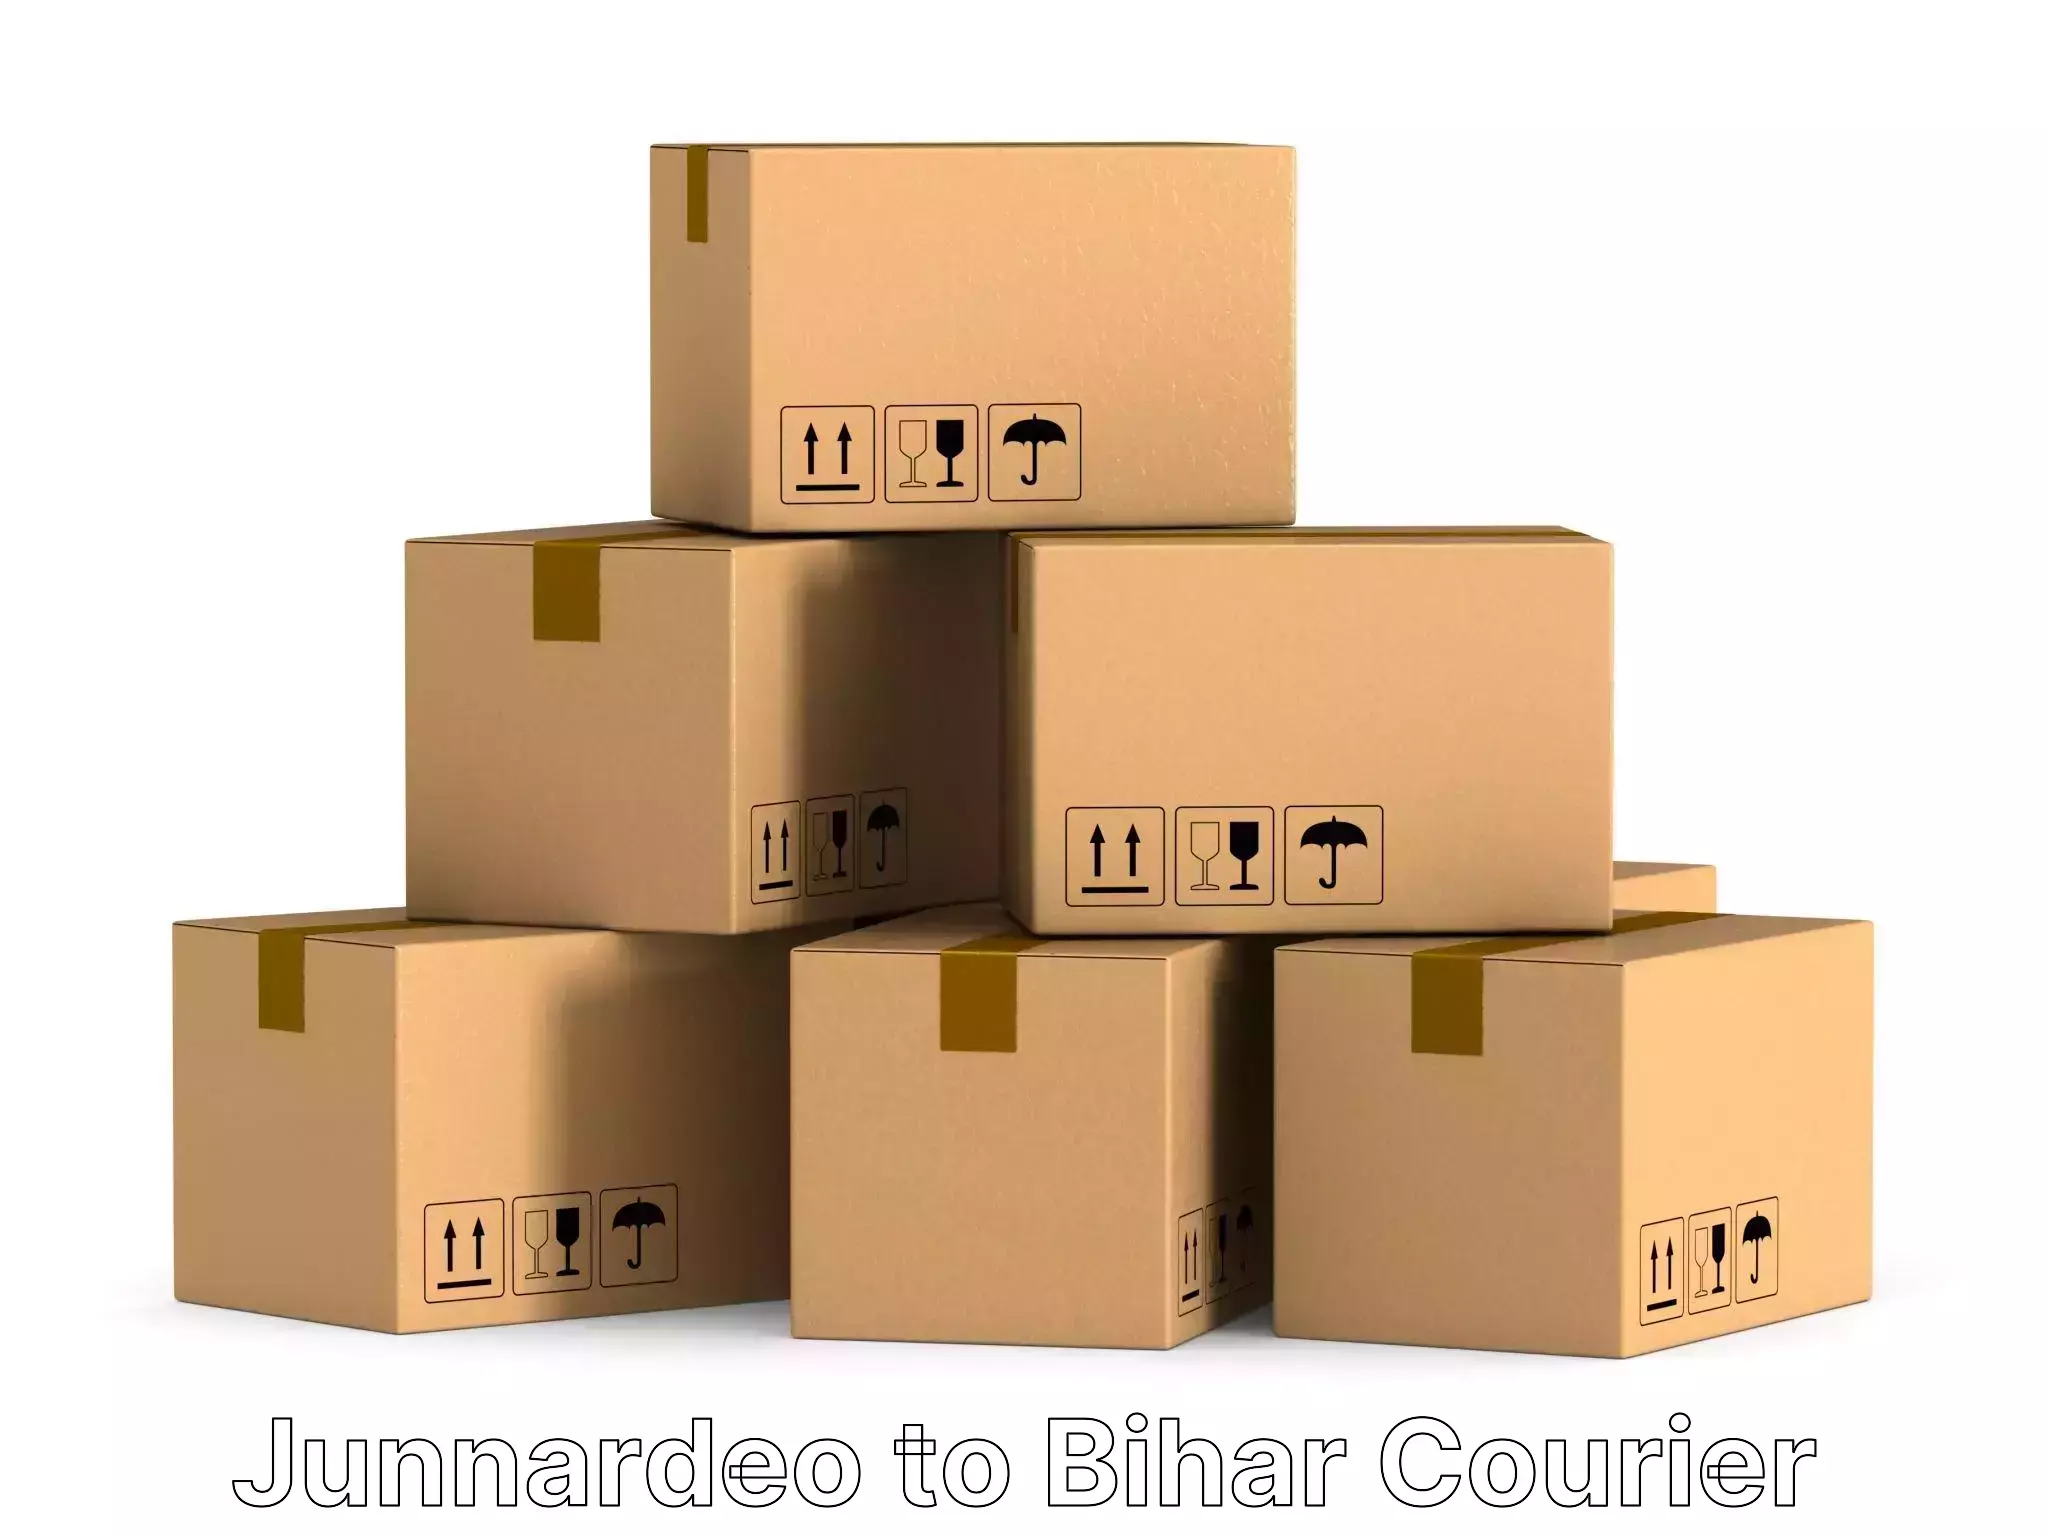 Furniture moving assistance in Junnardeo to East Champaran